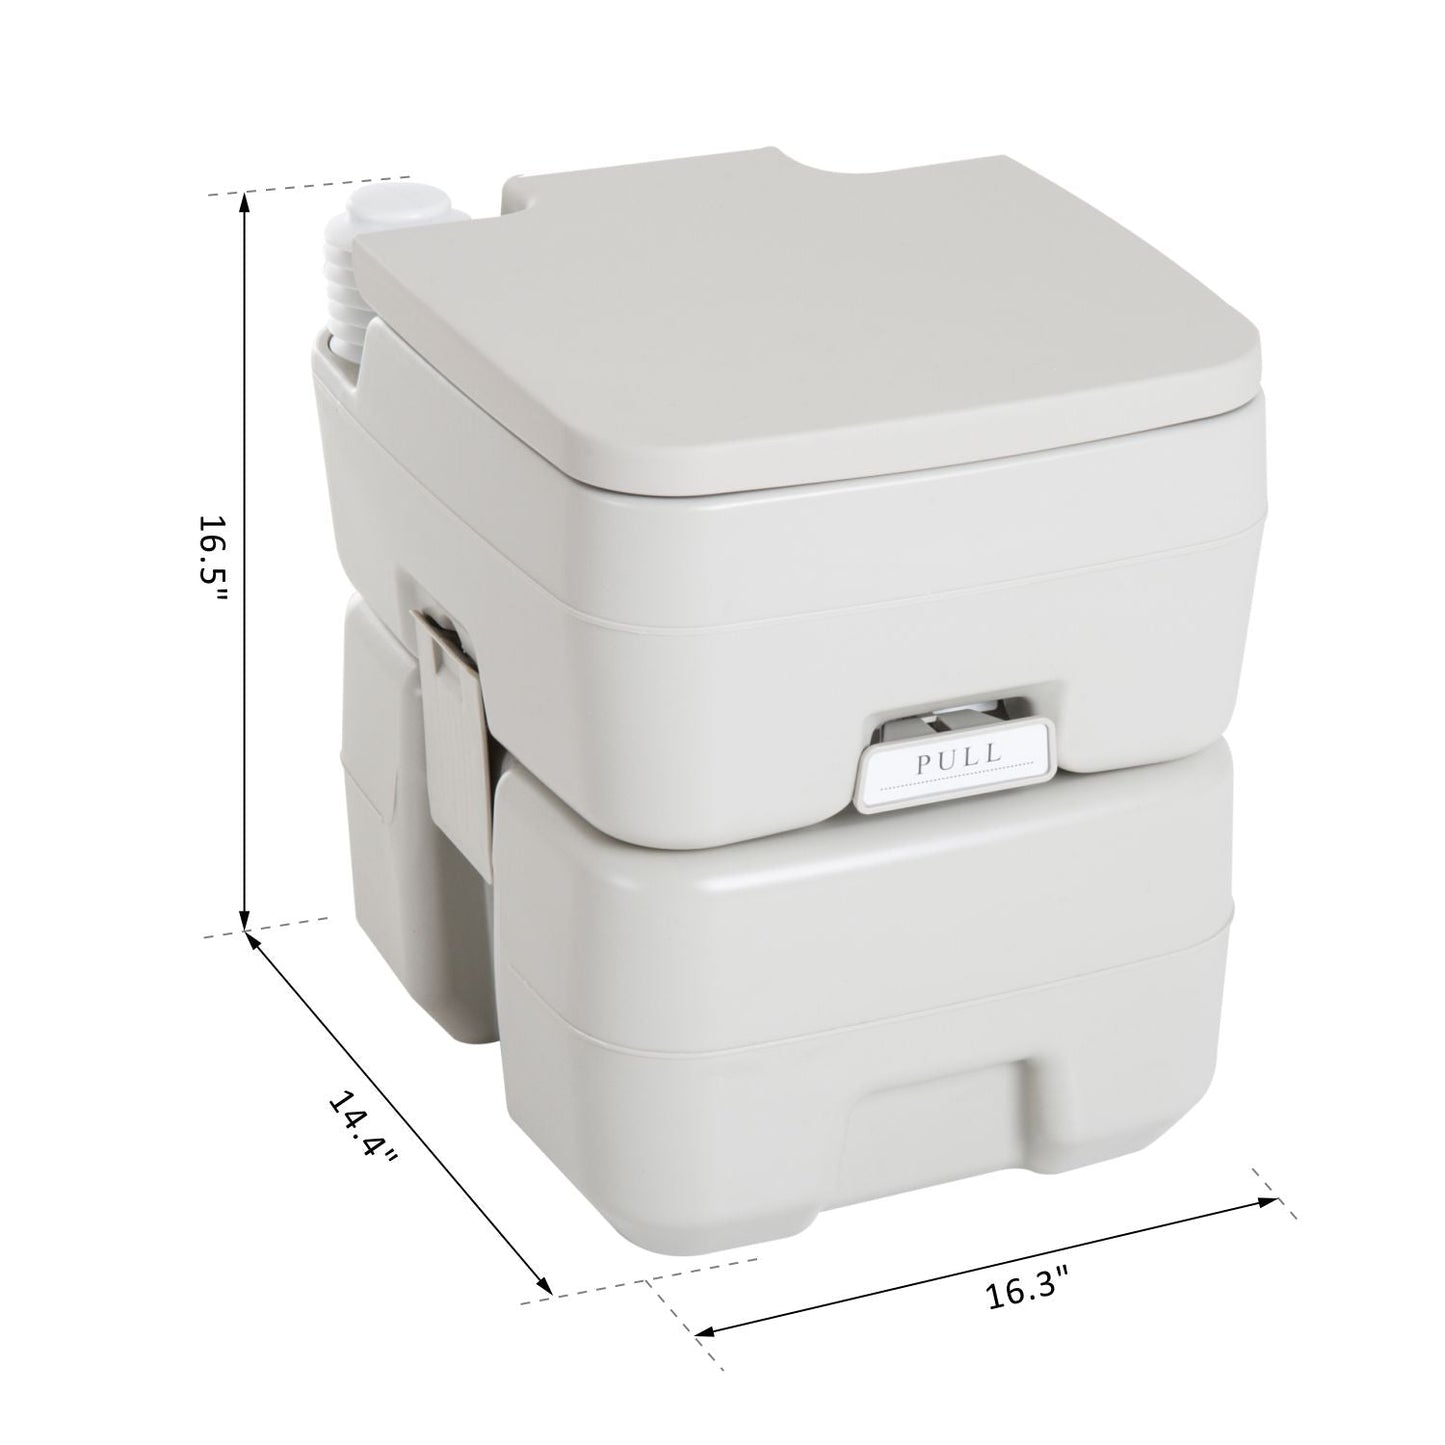 Outdoor Portable Travel Toilet Detachable Flushable Tank Easy to Use 3 Way Pistol for Camping Hiking Boating Roadtripping 5.3 Gallon (20L) at Gallery Canada